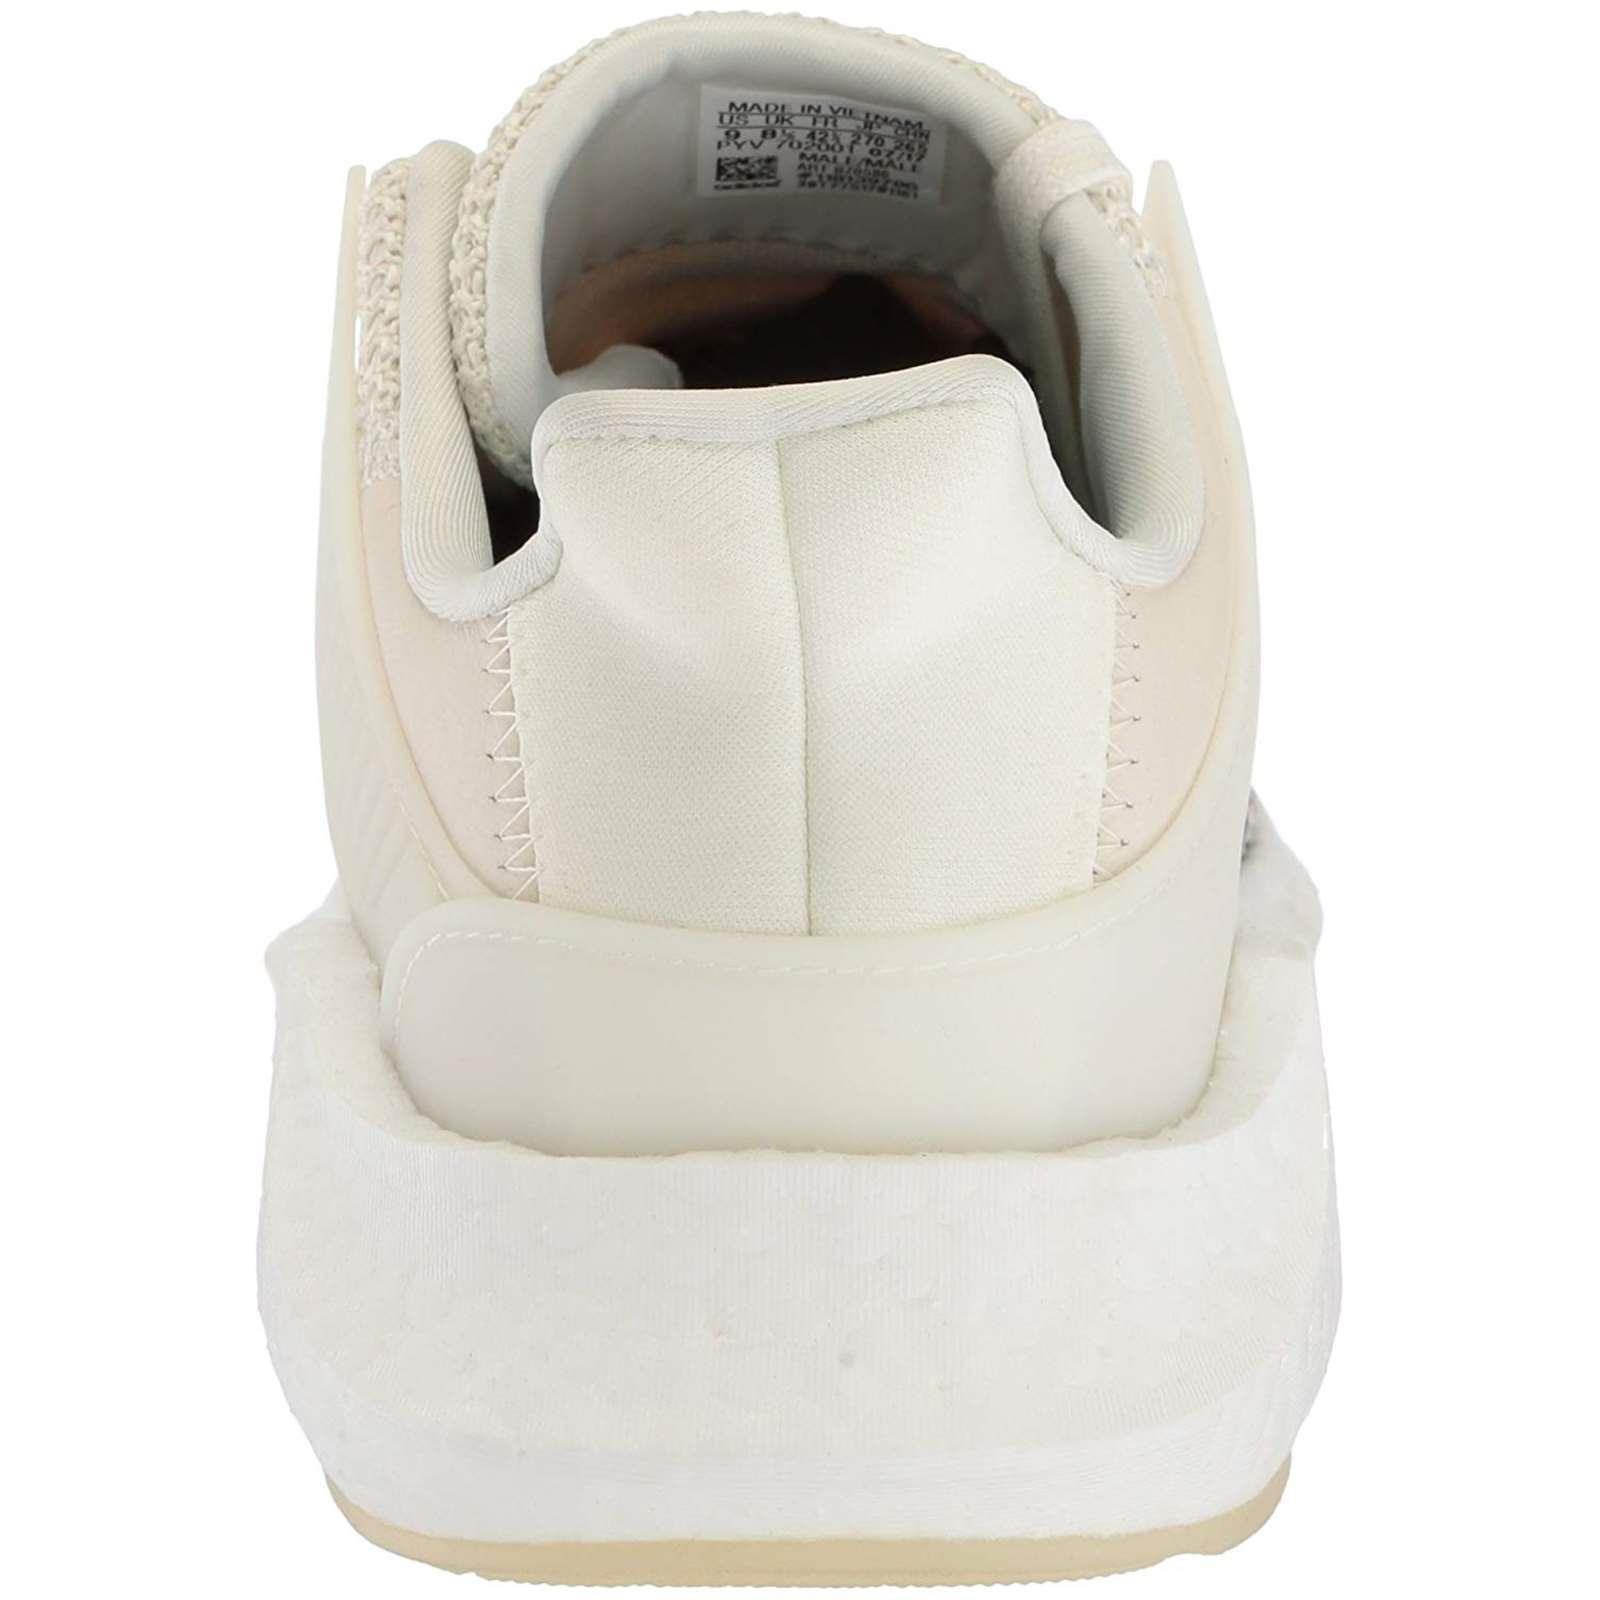 Adidas shoes EQT Support - White 2